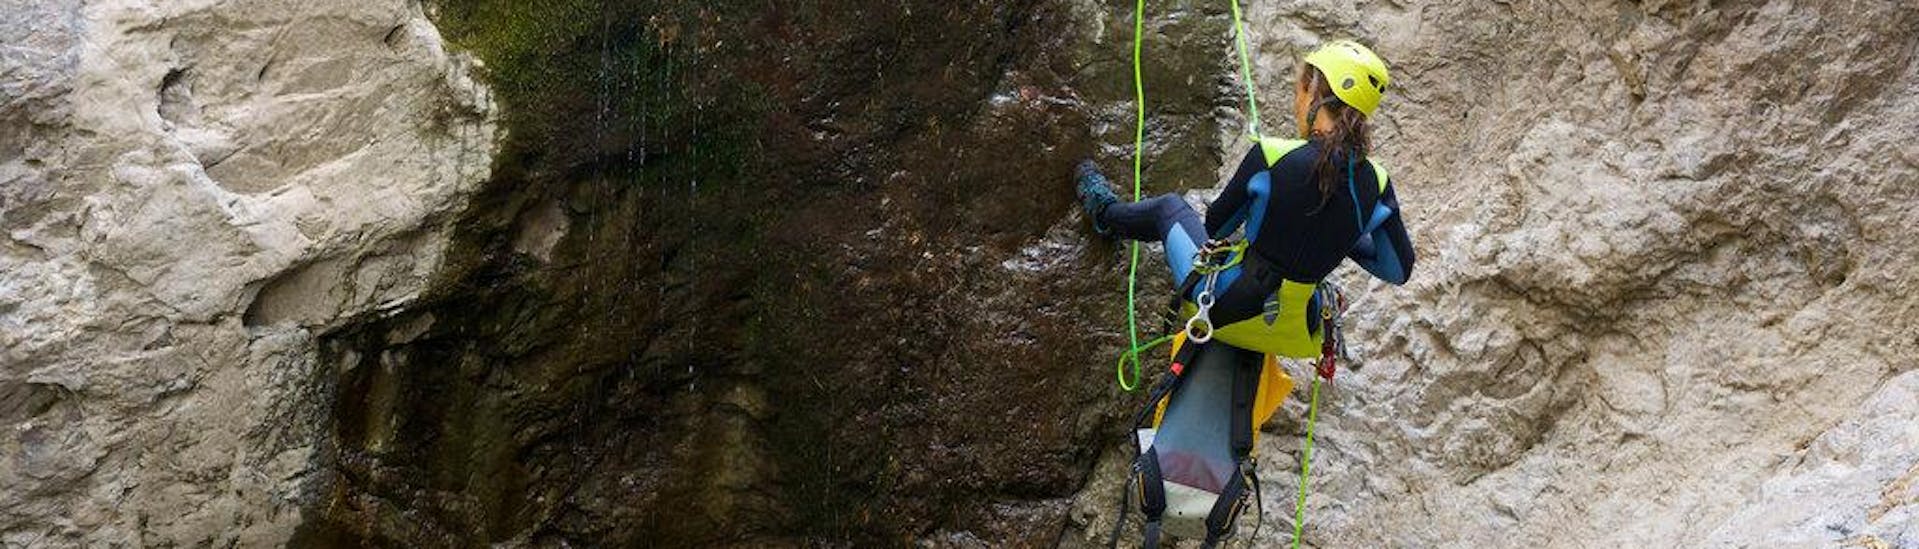 A woman descending a canyon during a full-day canyoning activity.